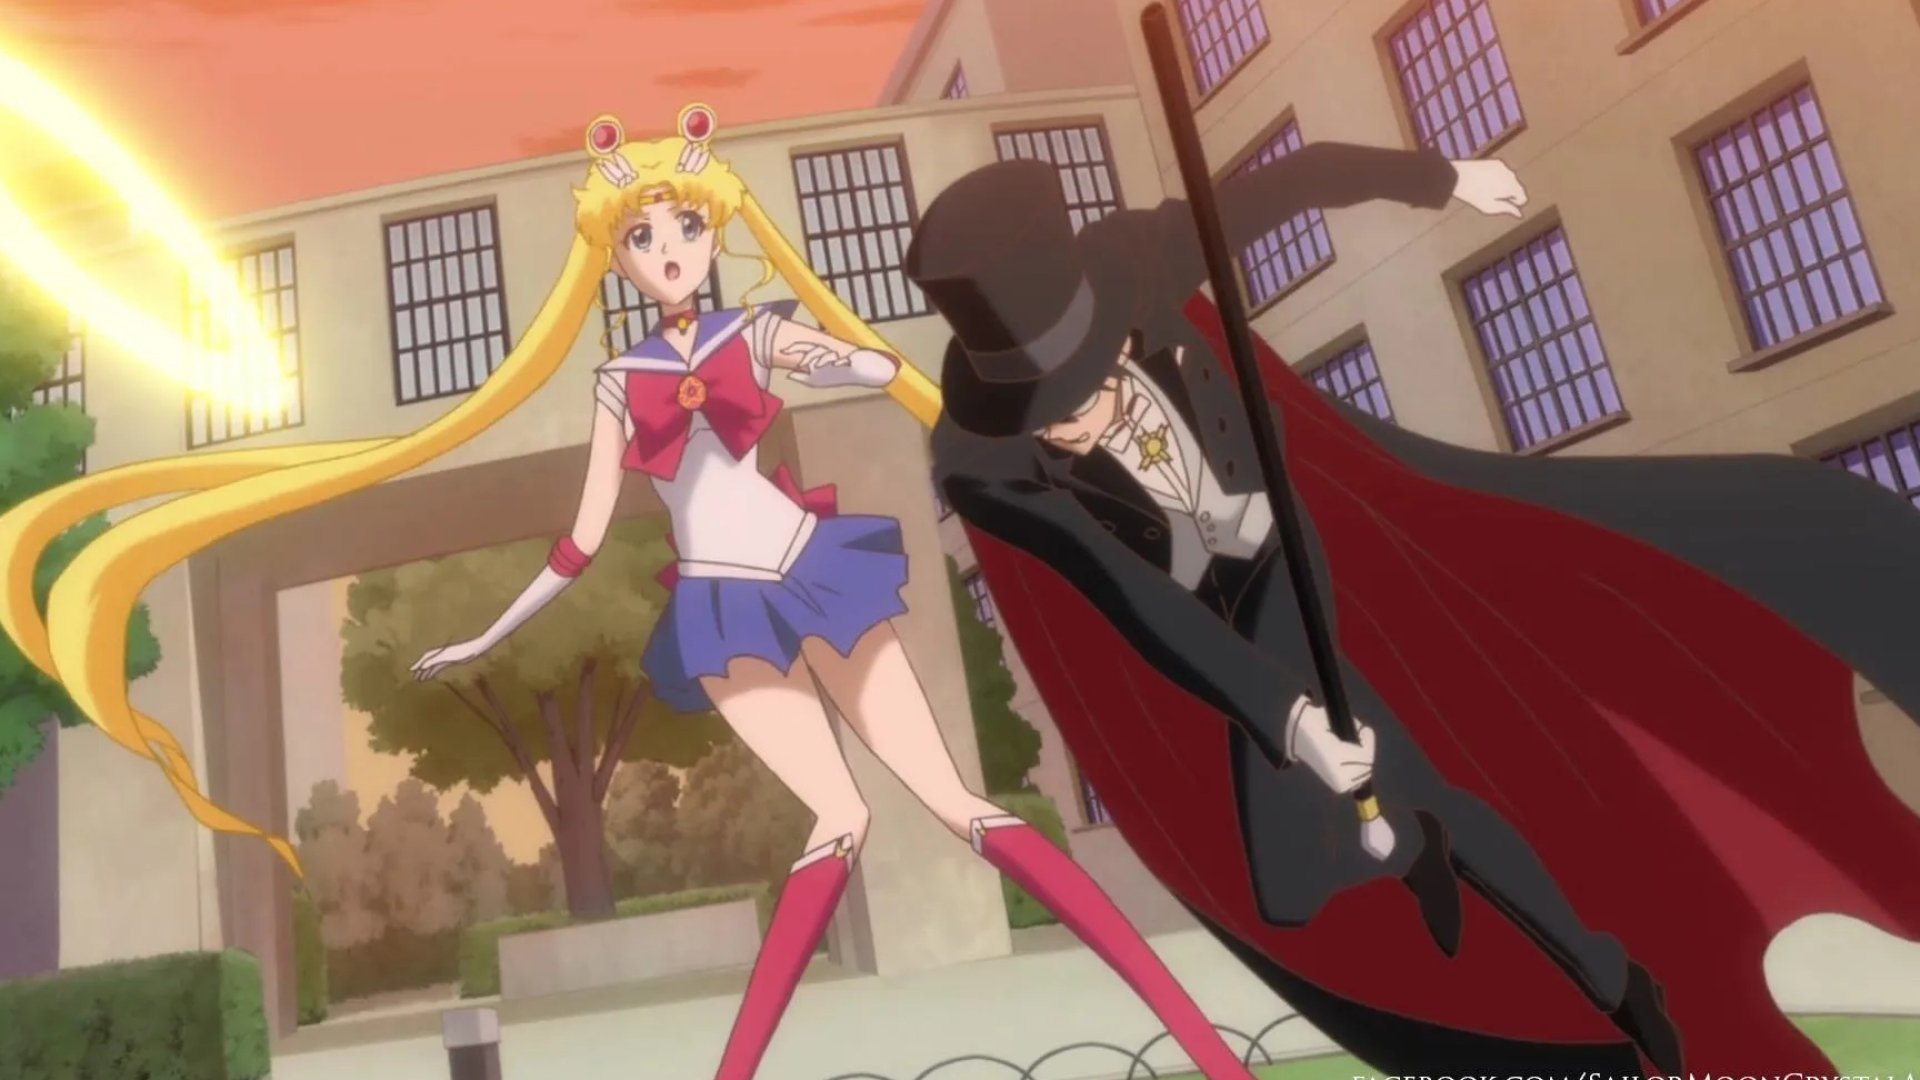 1920x1080 Sailor Moon 25 Things About Tuxedo Mask That Bloom Our Roses